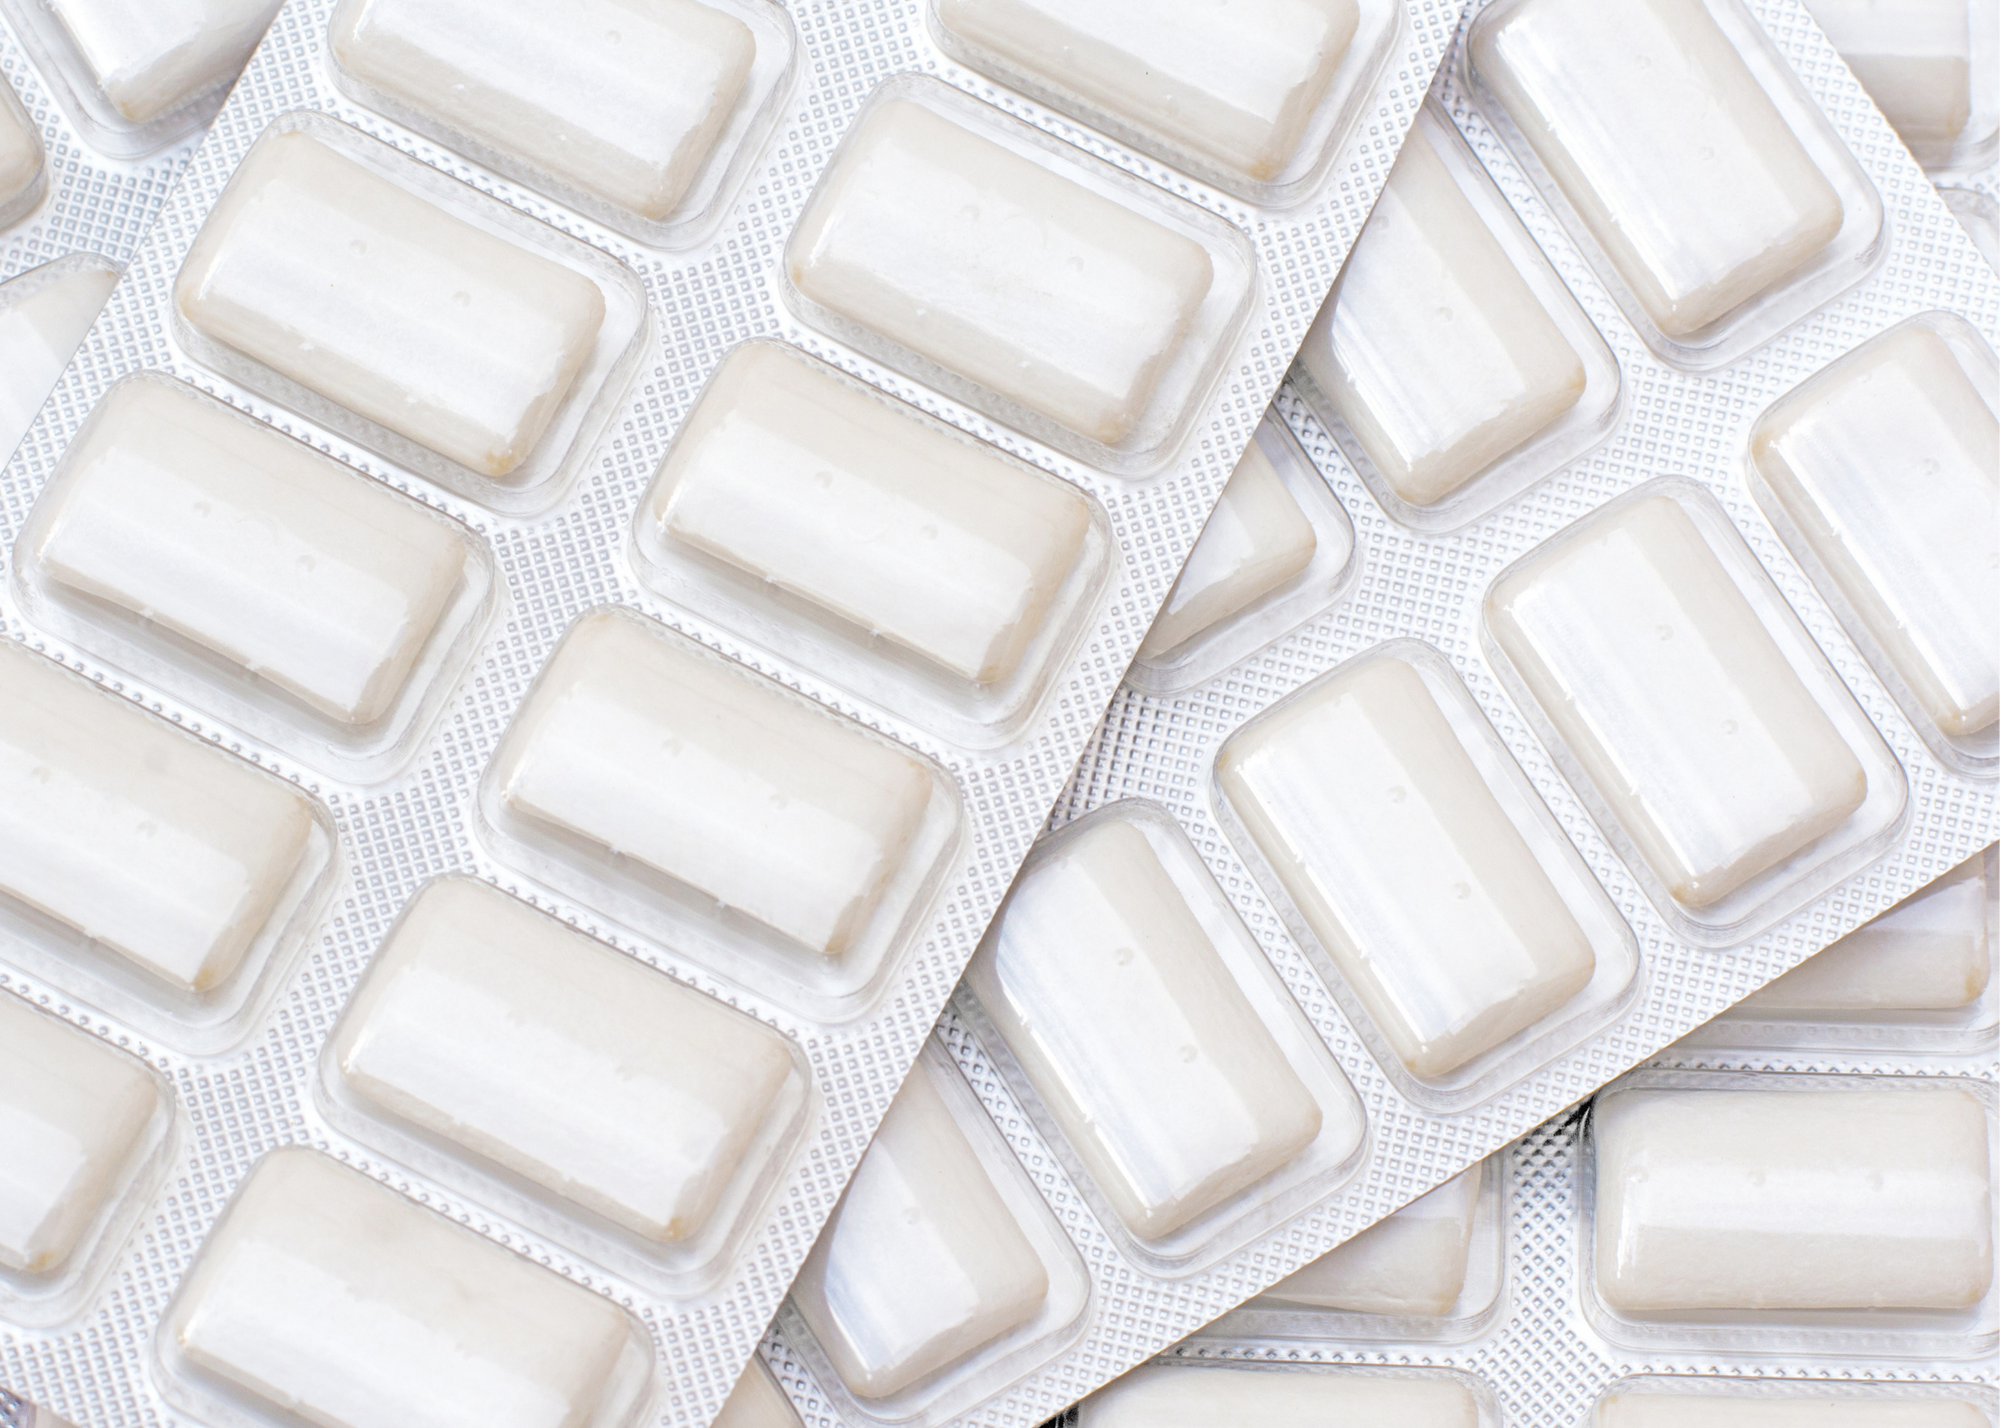 Is nicotine gum bad for you?